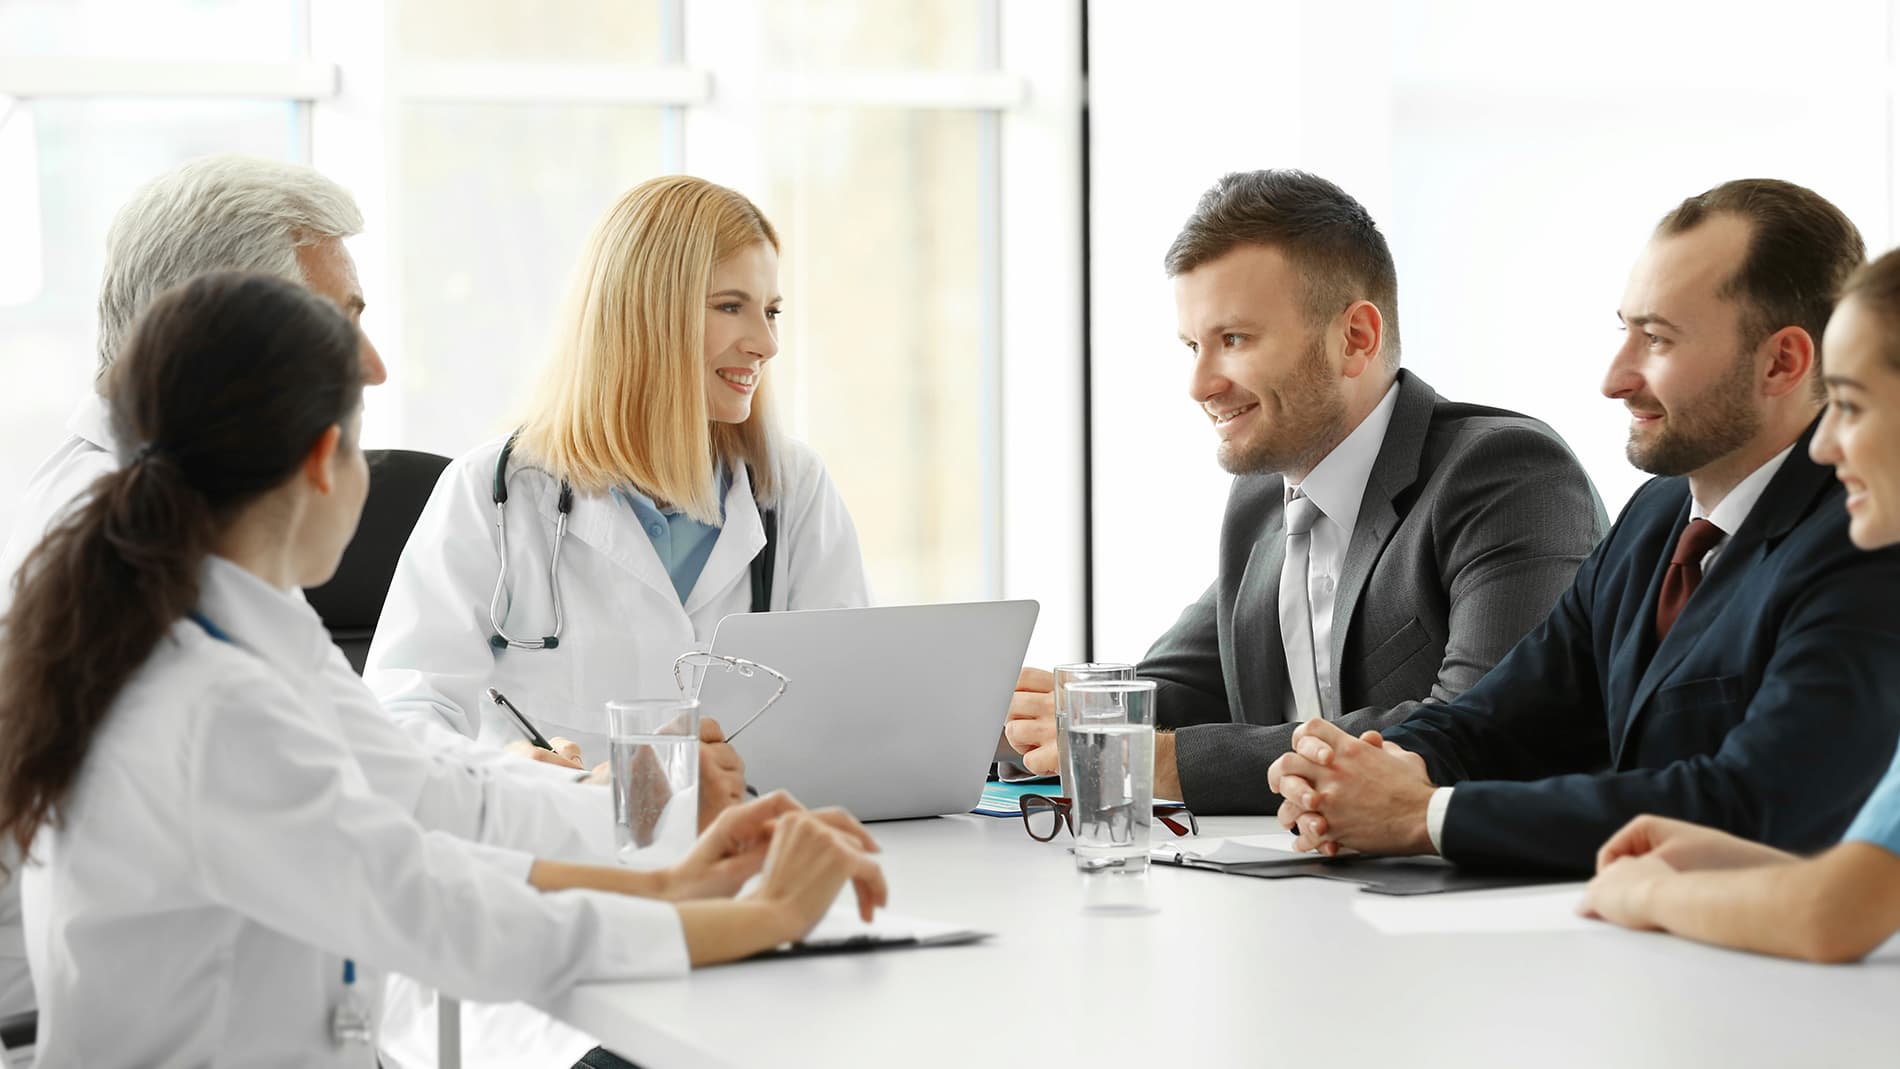 Group of doctors in a meeting at an office.